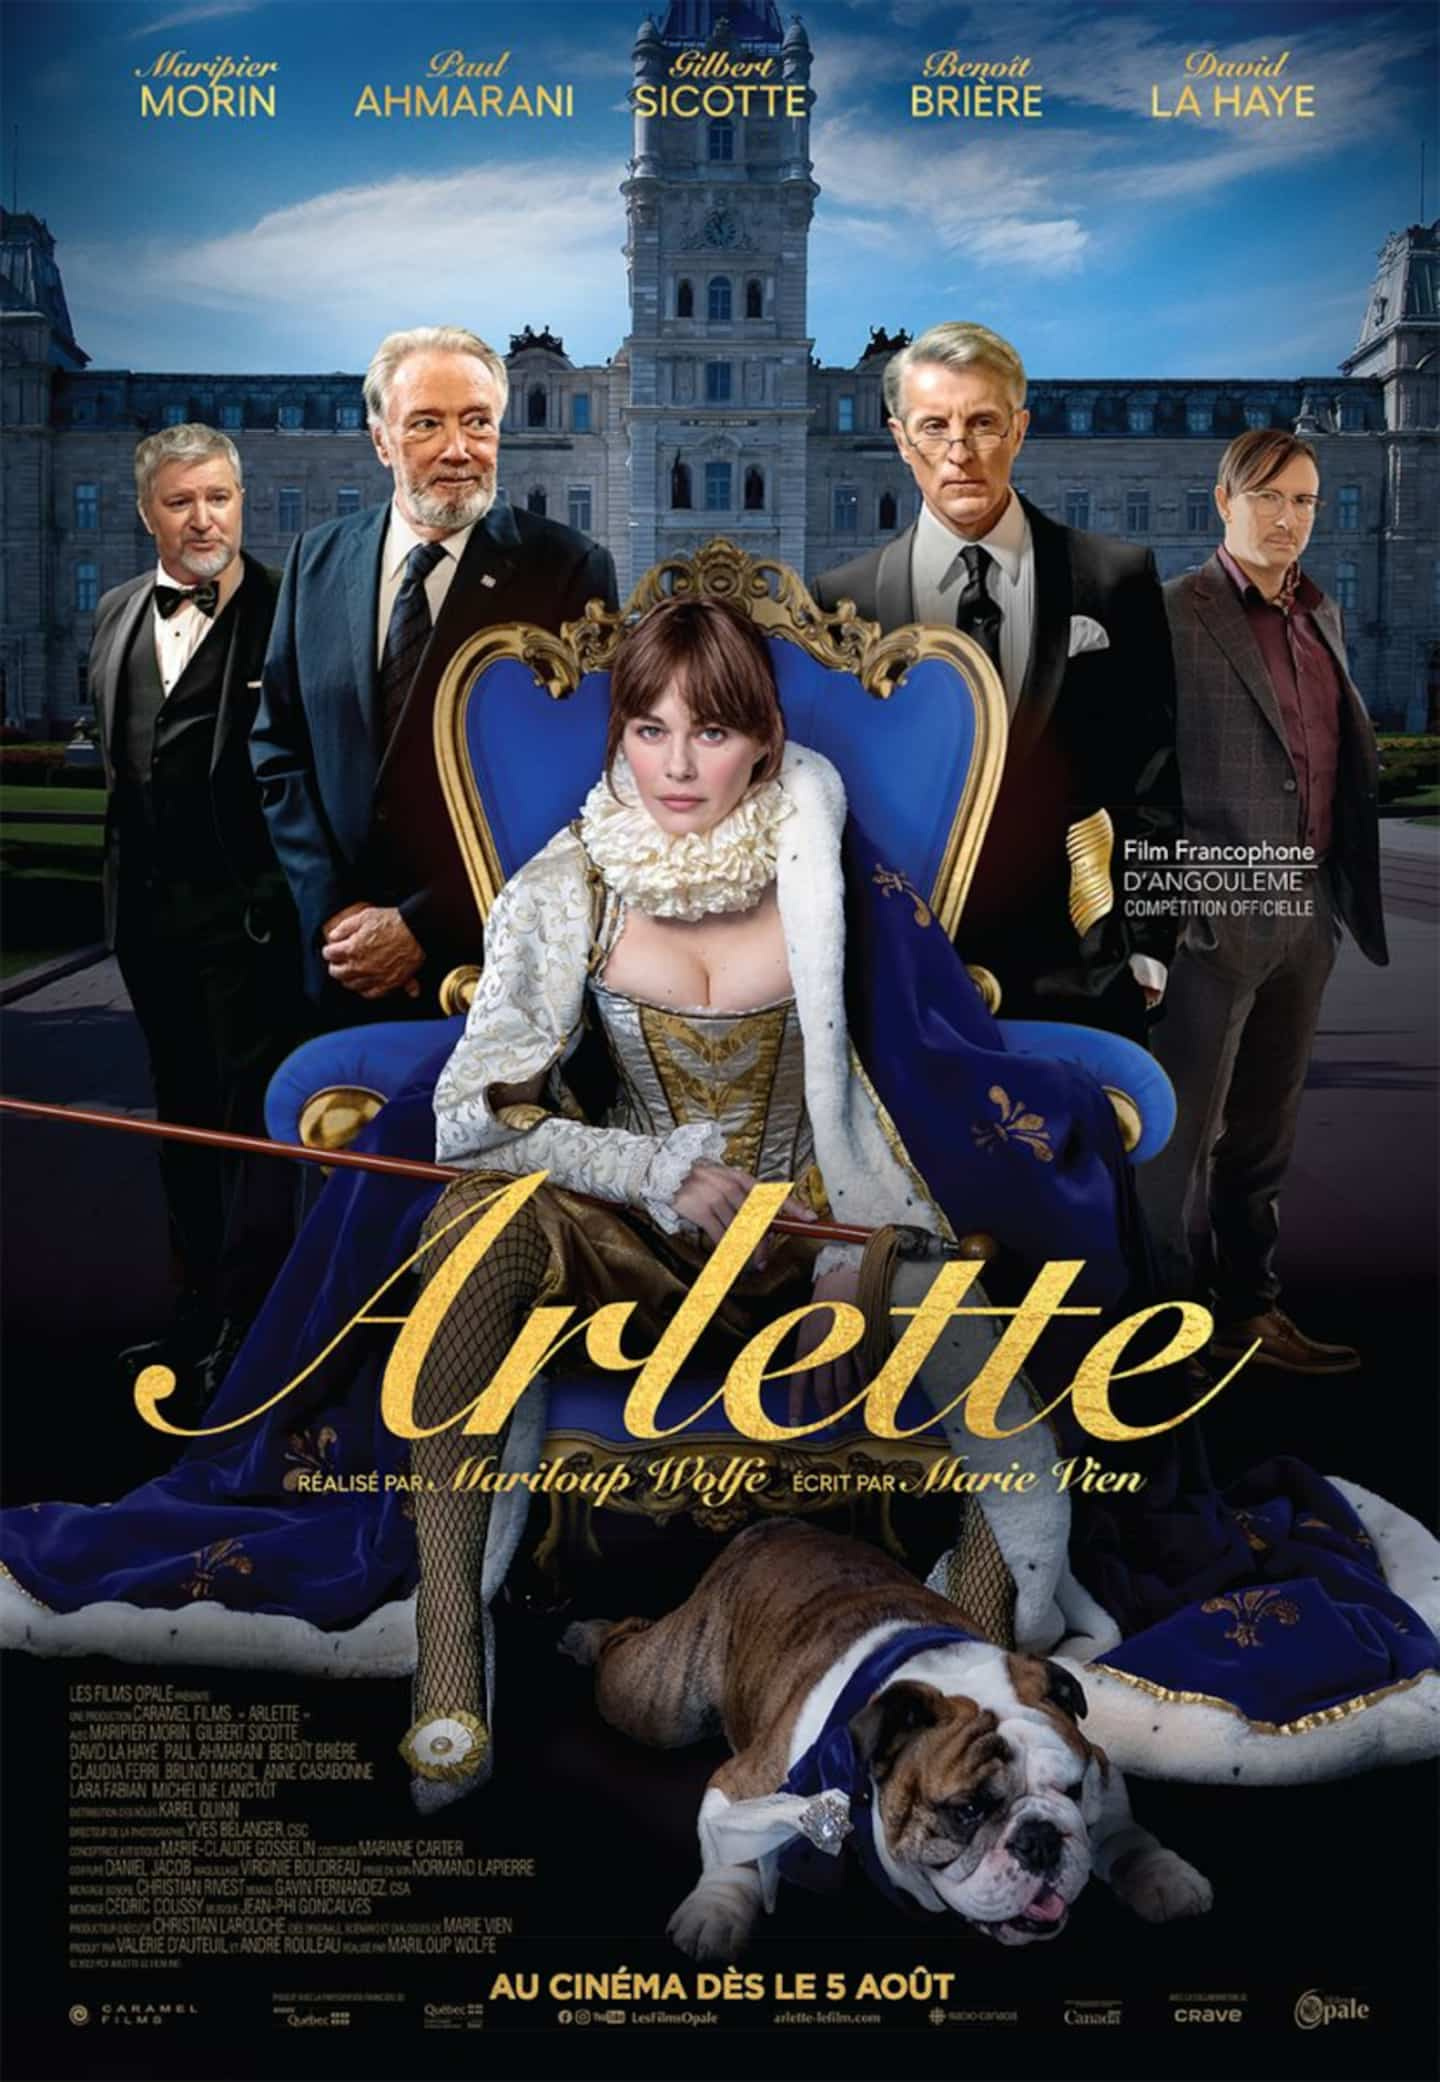 Unveiling of the poster: "Arlette" in official competition in Angoulême